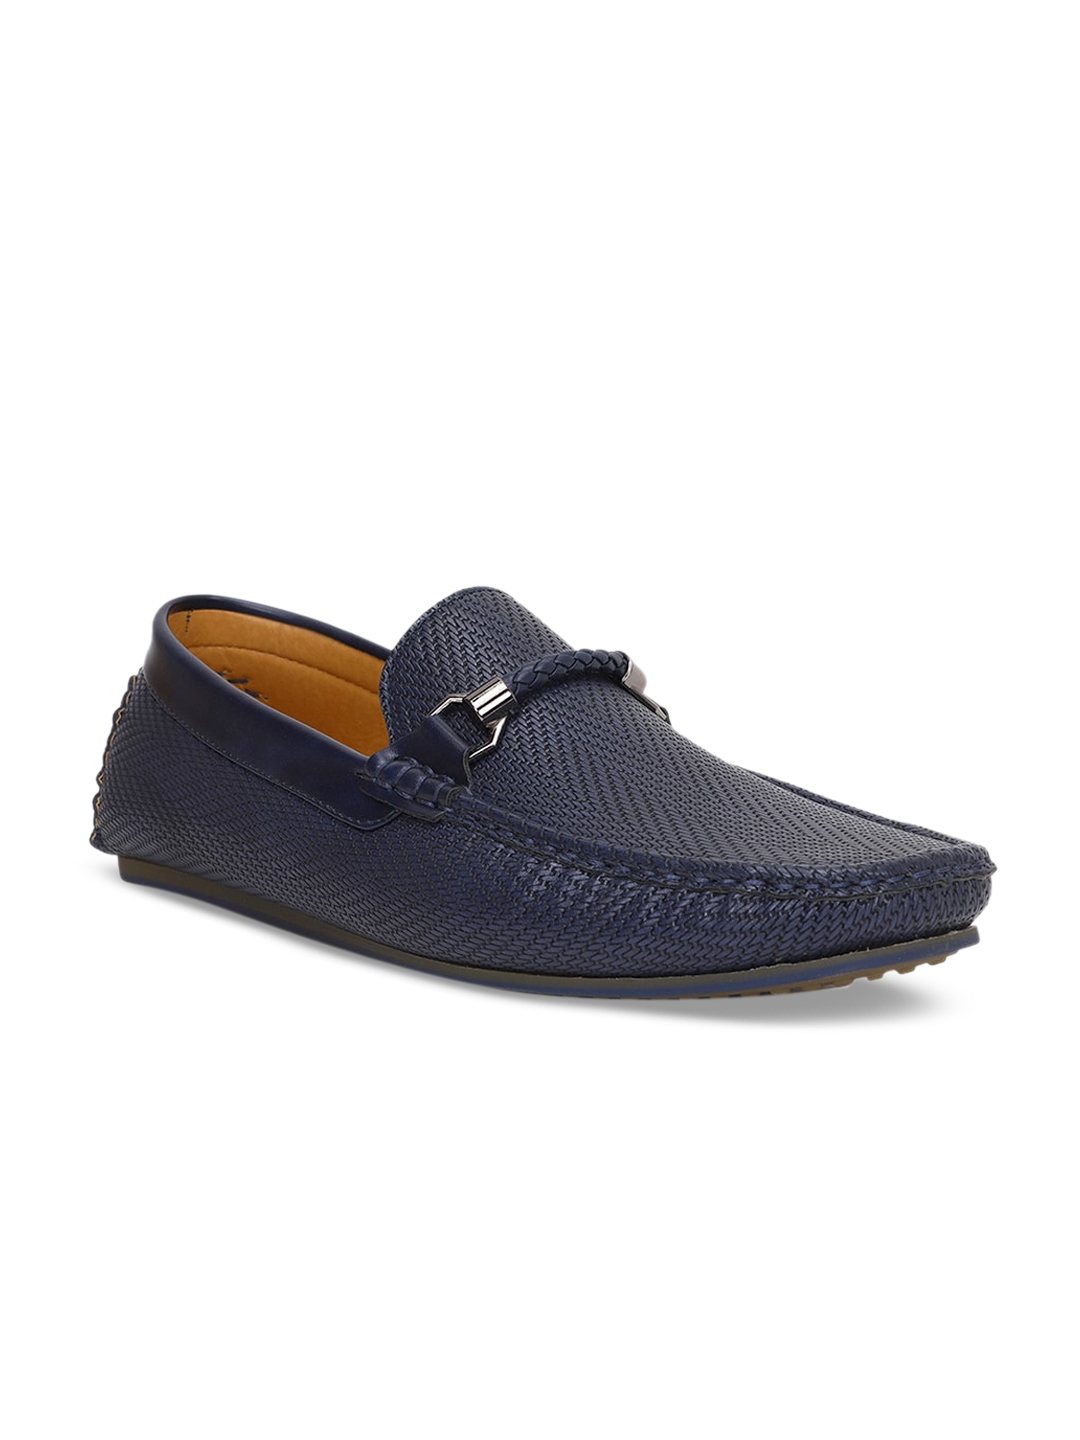 Buy Bata Men Navy Blue Leather Loafers - Casual Shoes for Men 13034800 ...